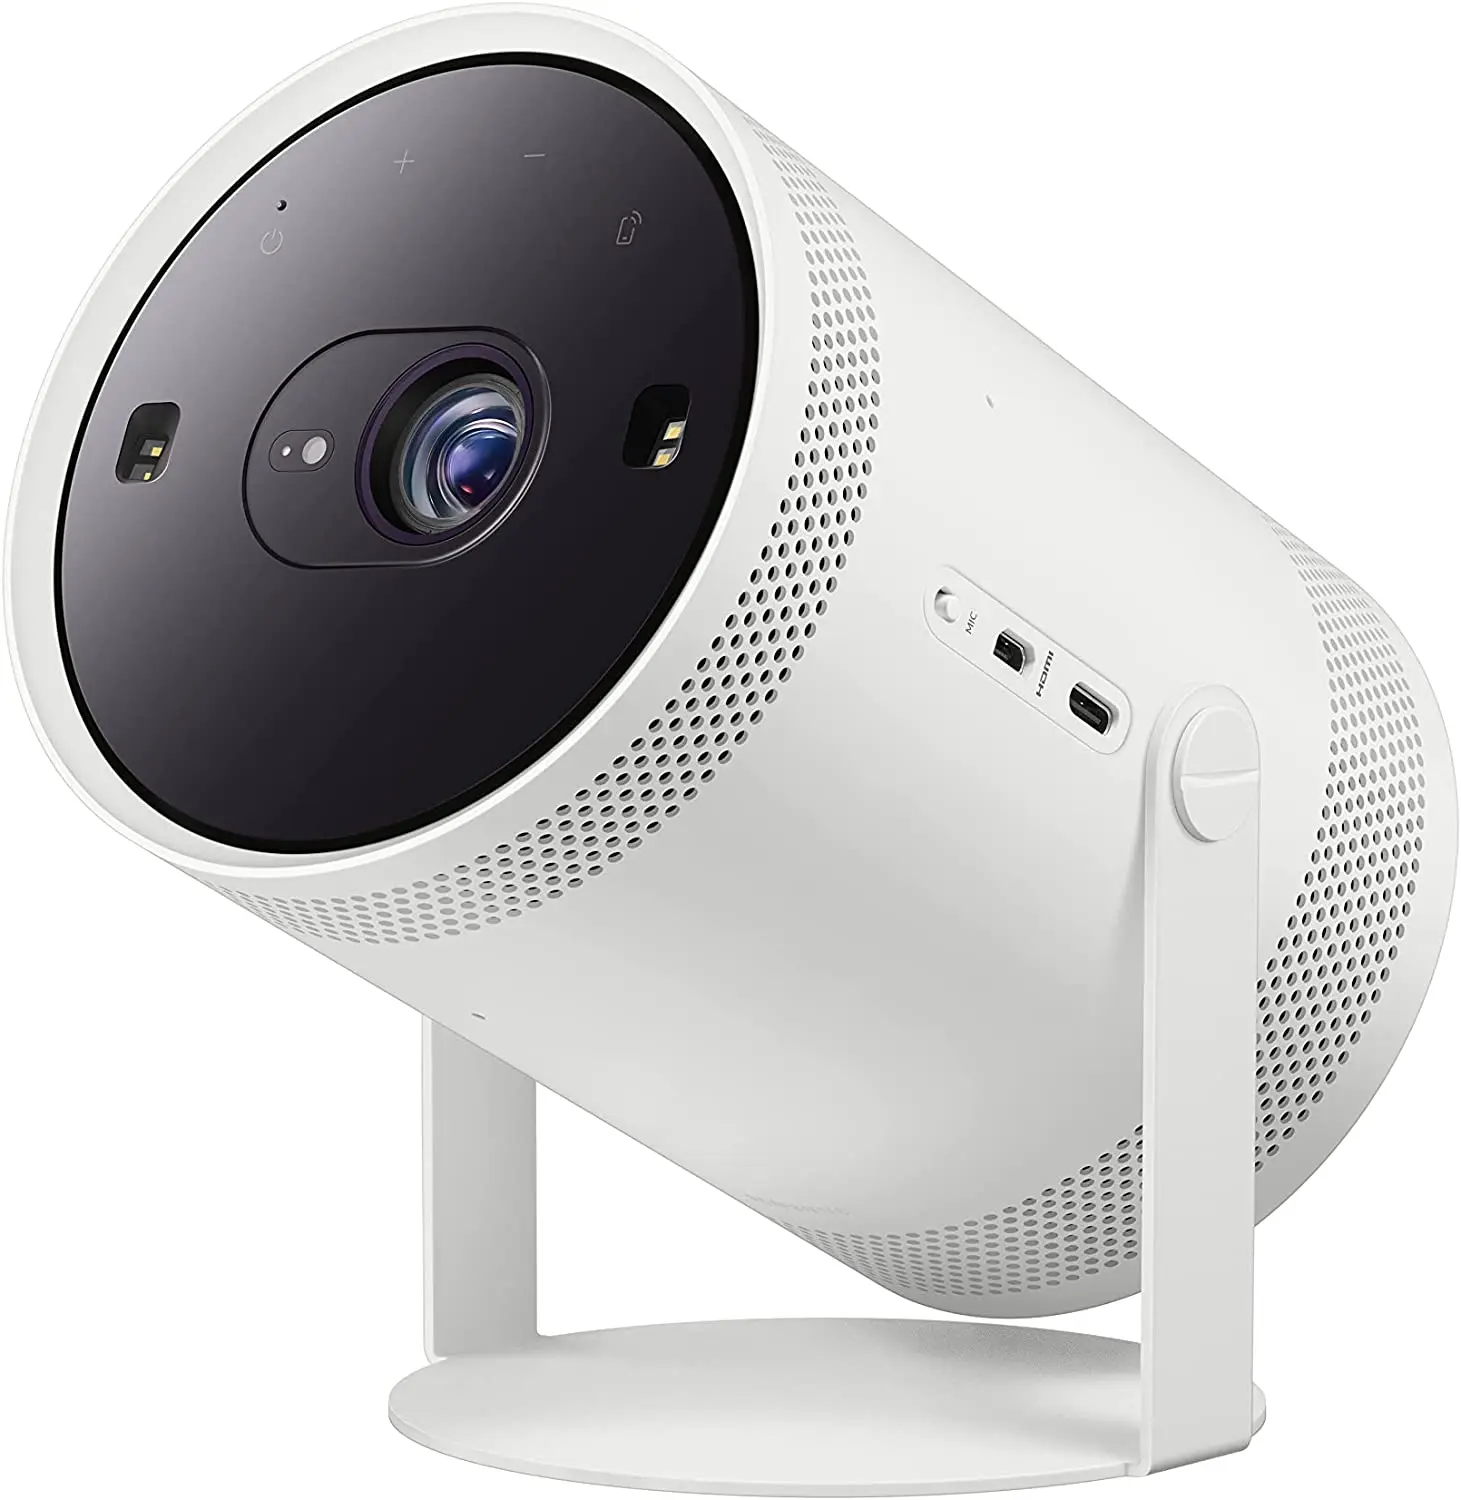 

The Freestyle Smart Portable Projector, FHD, HDR, Indoor/Outdoor Home Use, Big Screen Experience, 360 Sound